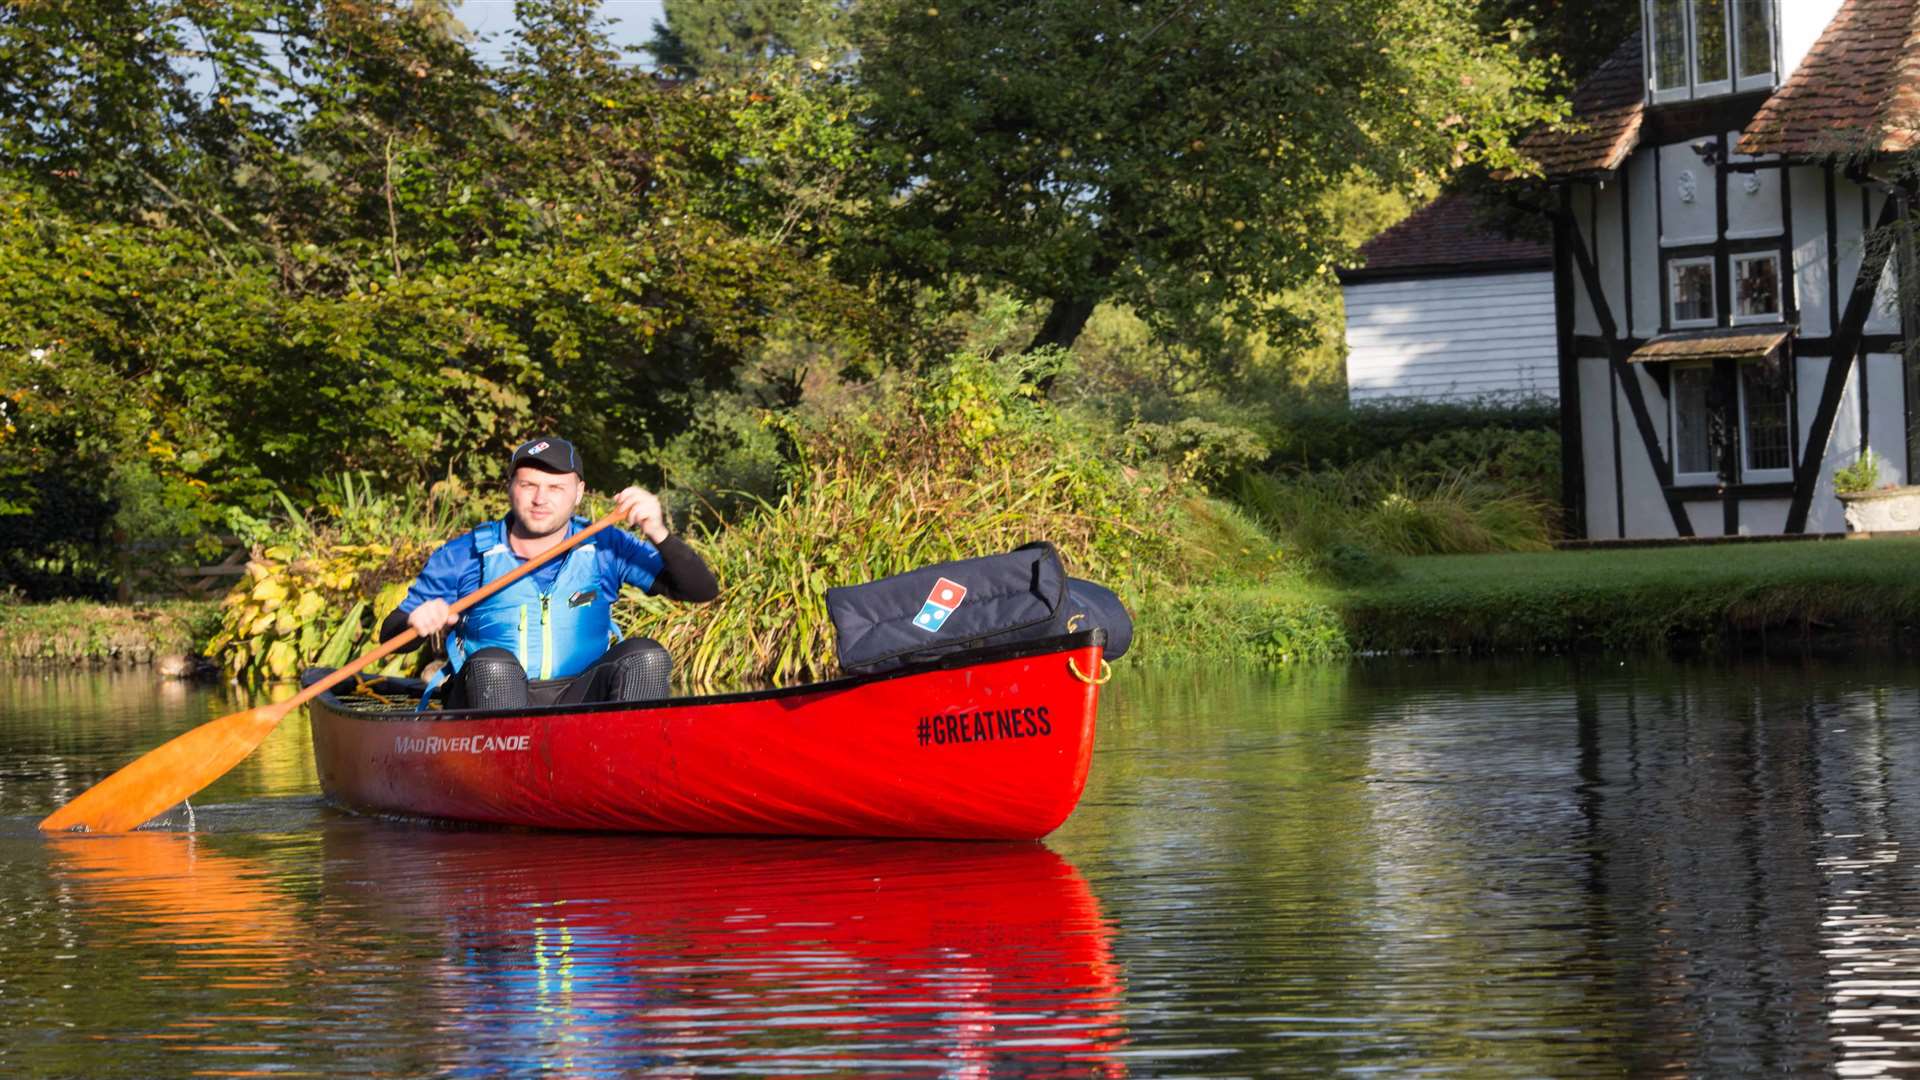 Domino's announced earlier this month it was trialling a pizza delivery service by canoe. So we tested it out.